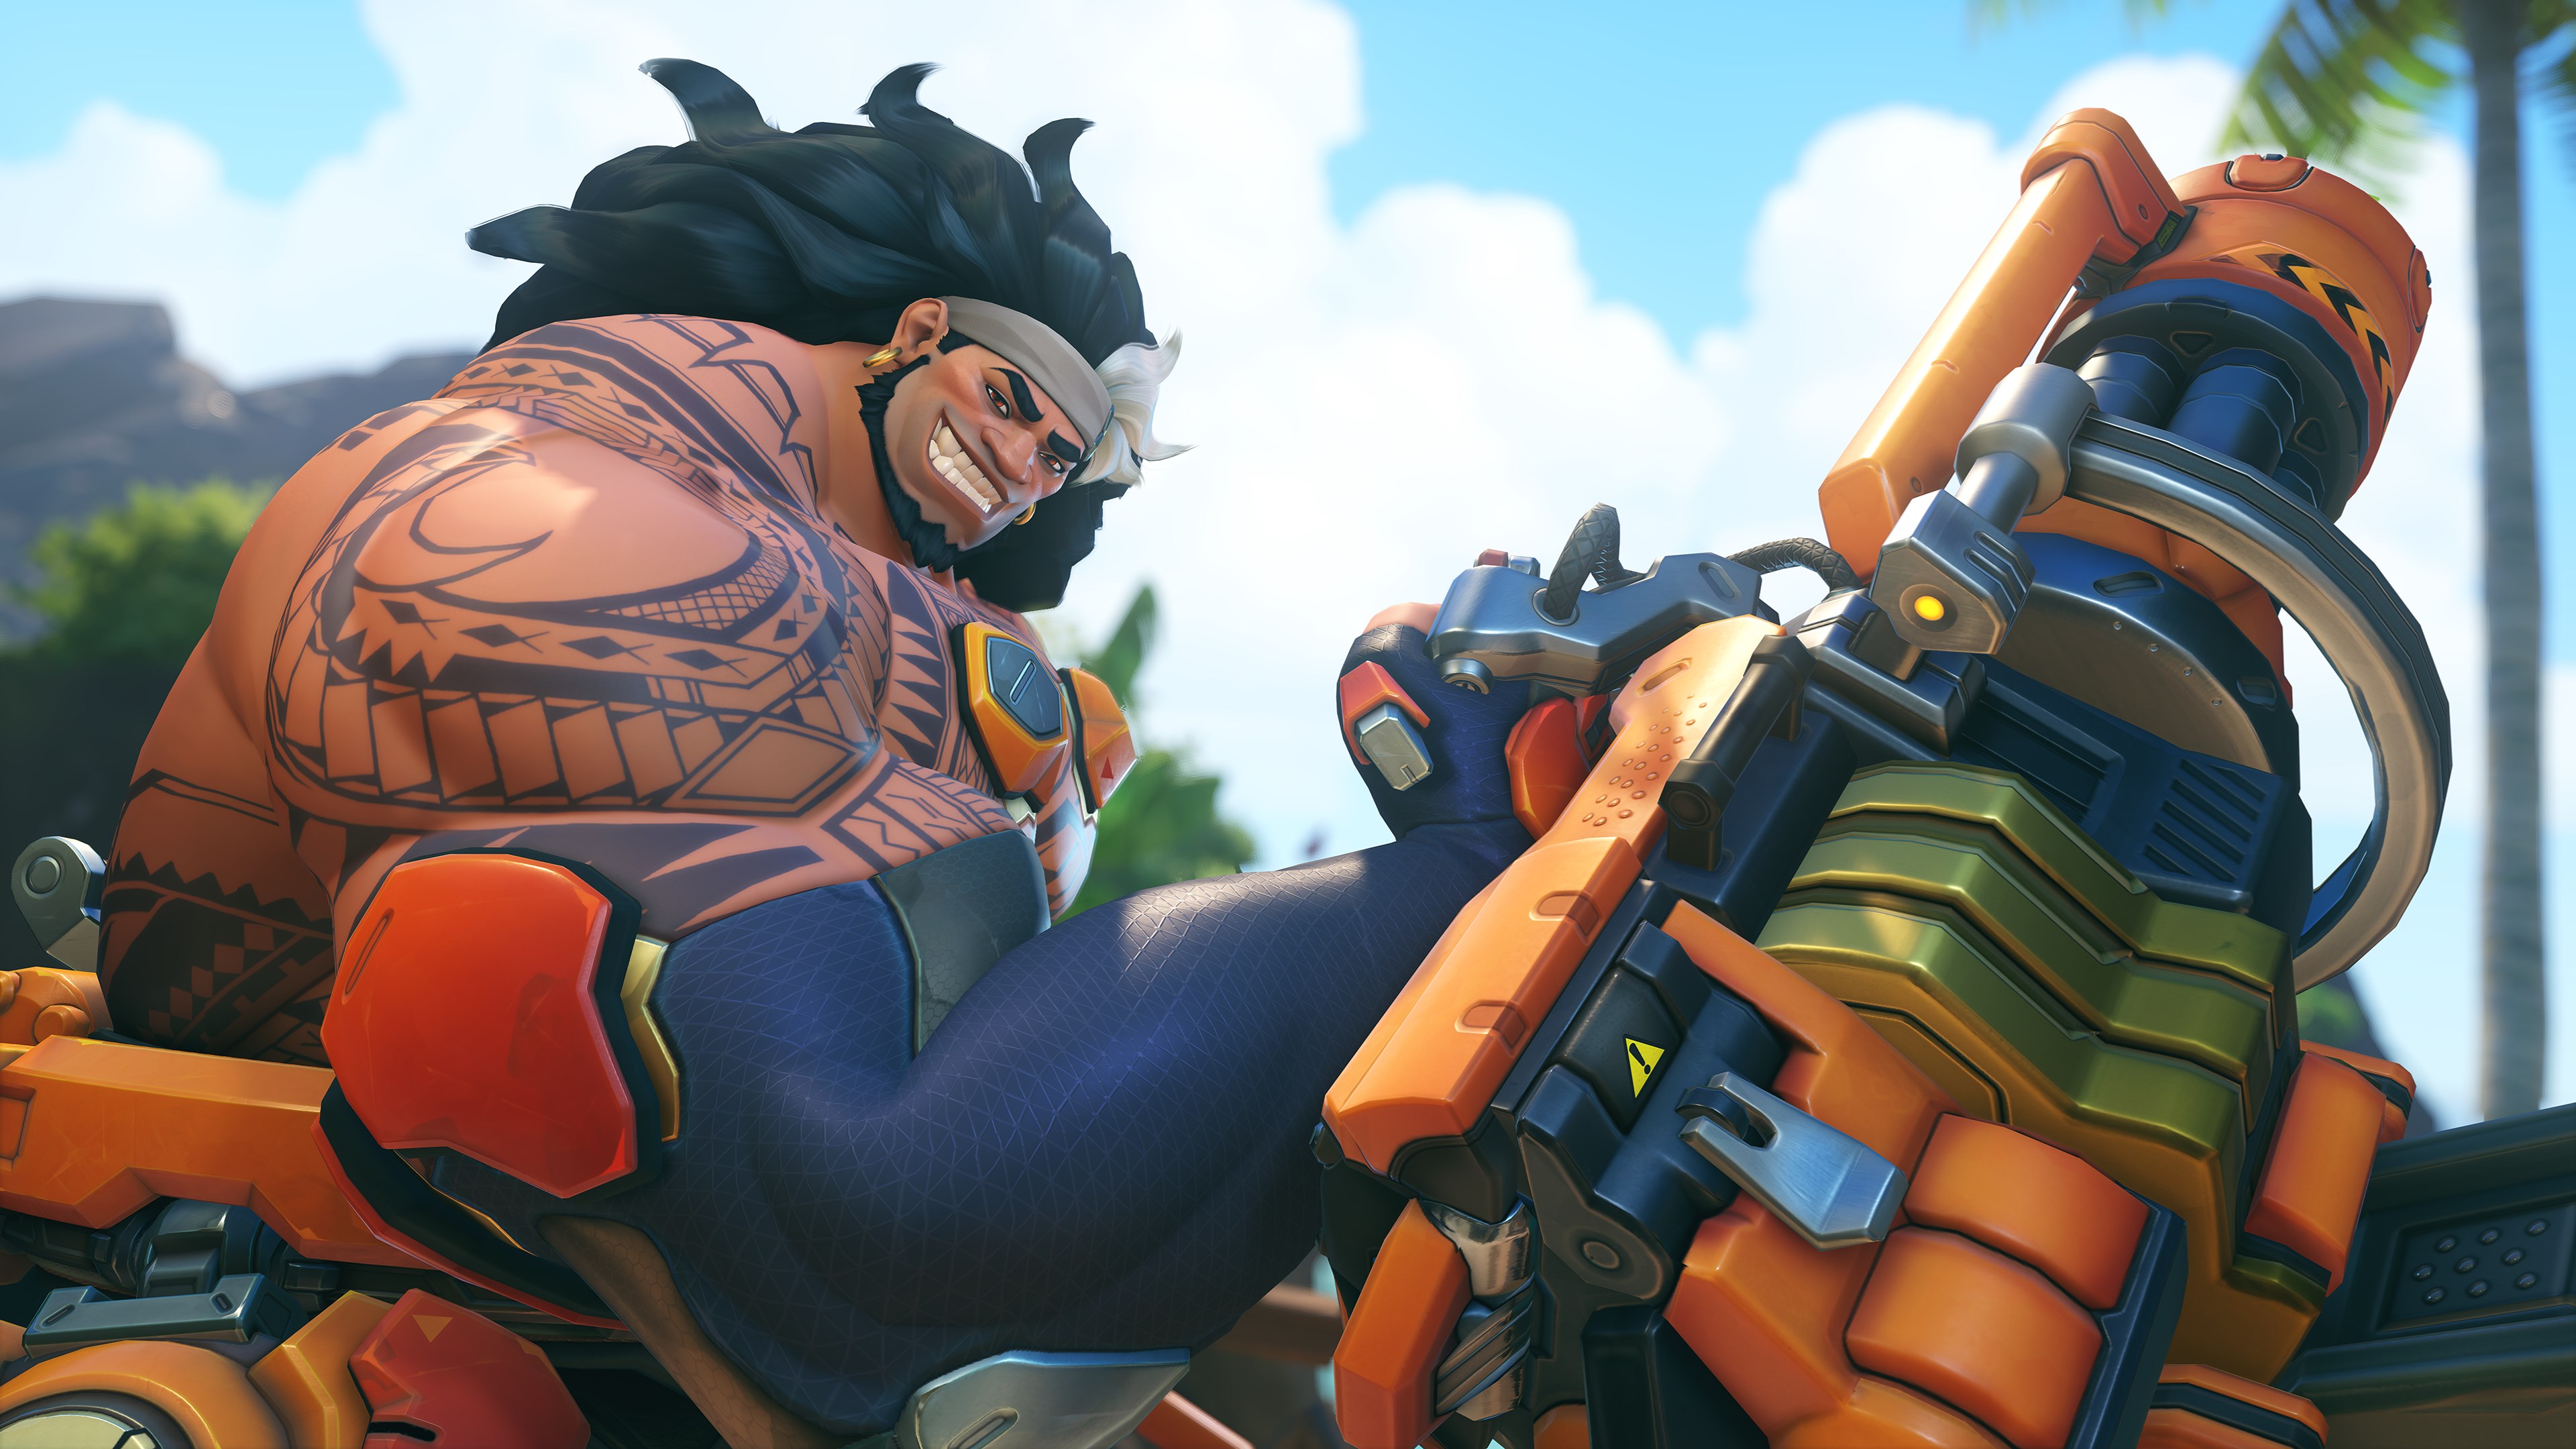 Backlash ensues as Overwatch 2 players face criticism for not having Mauga in their arsenal